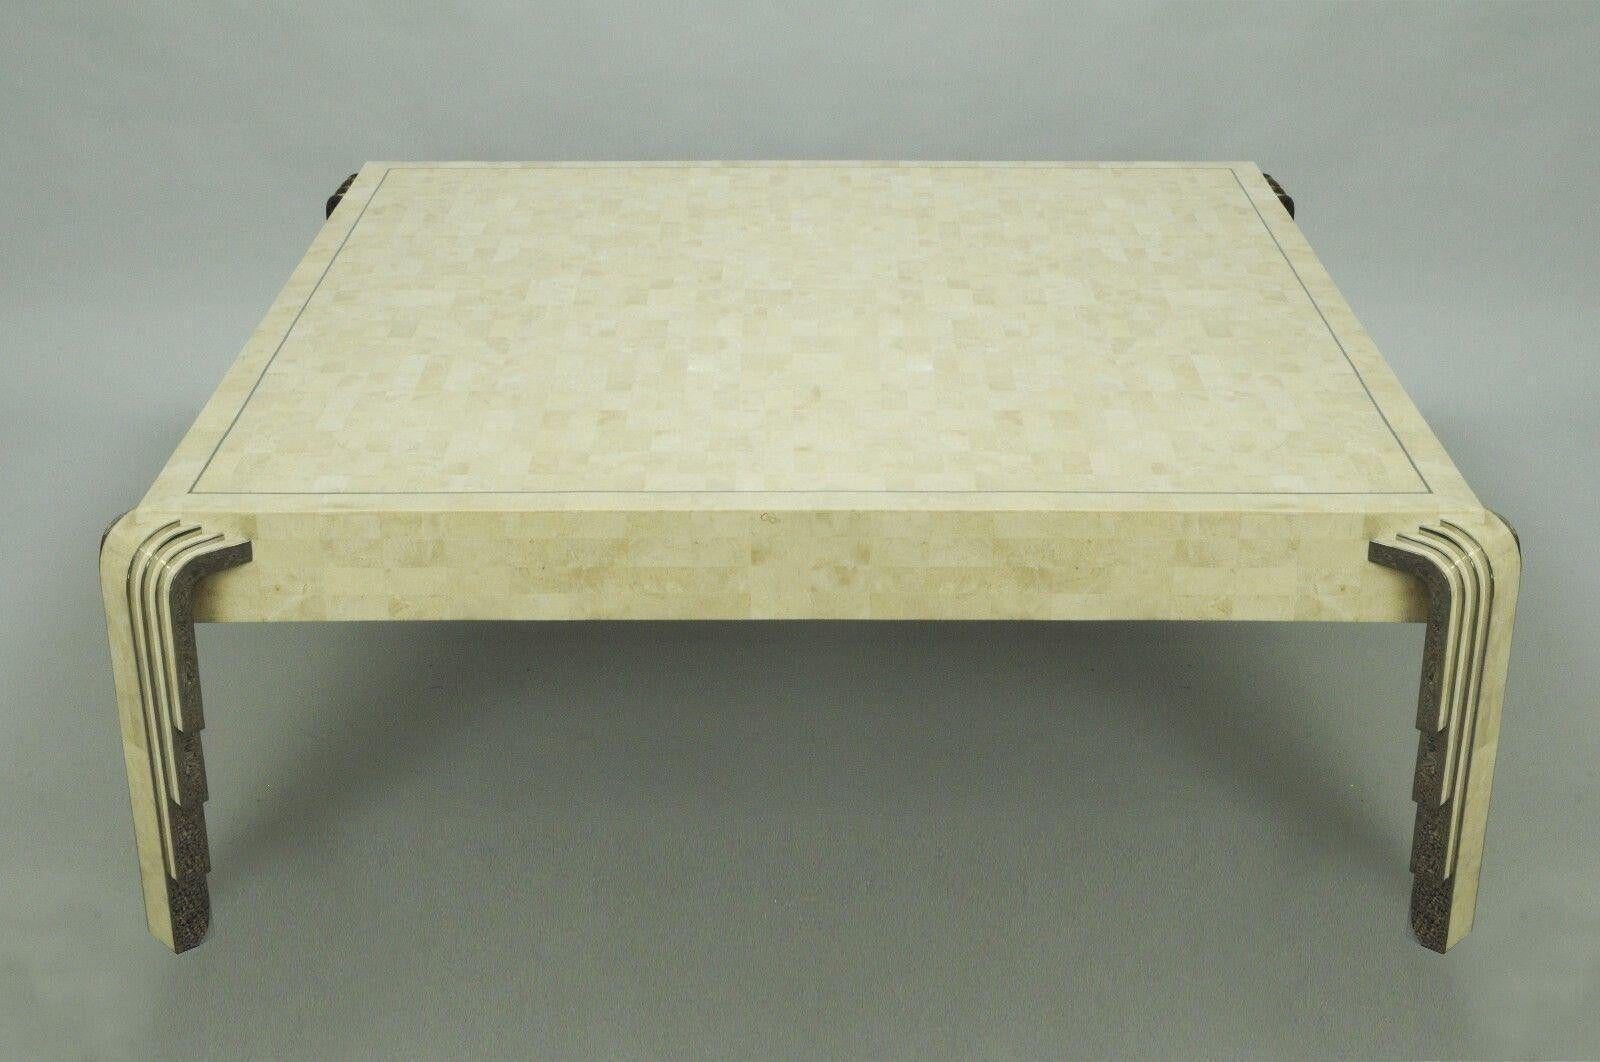 Tavola by Oggetti Tessellated Stone & Chrome Square Coffee Table in the Art Deco Style. Item features hand inlaid tessellated stone throughout, very nice vintage item. Circa  Late 20th Century. Measurements: 16.75